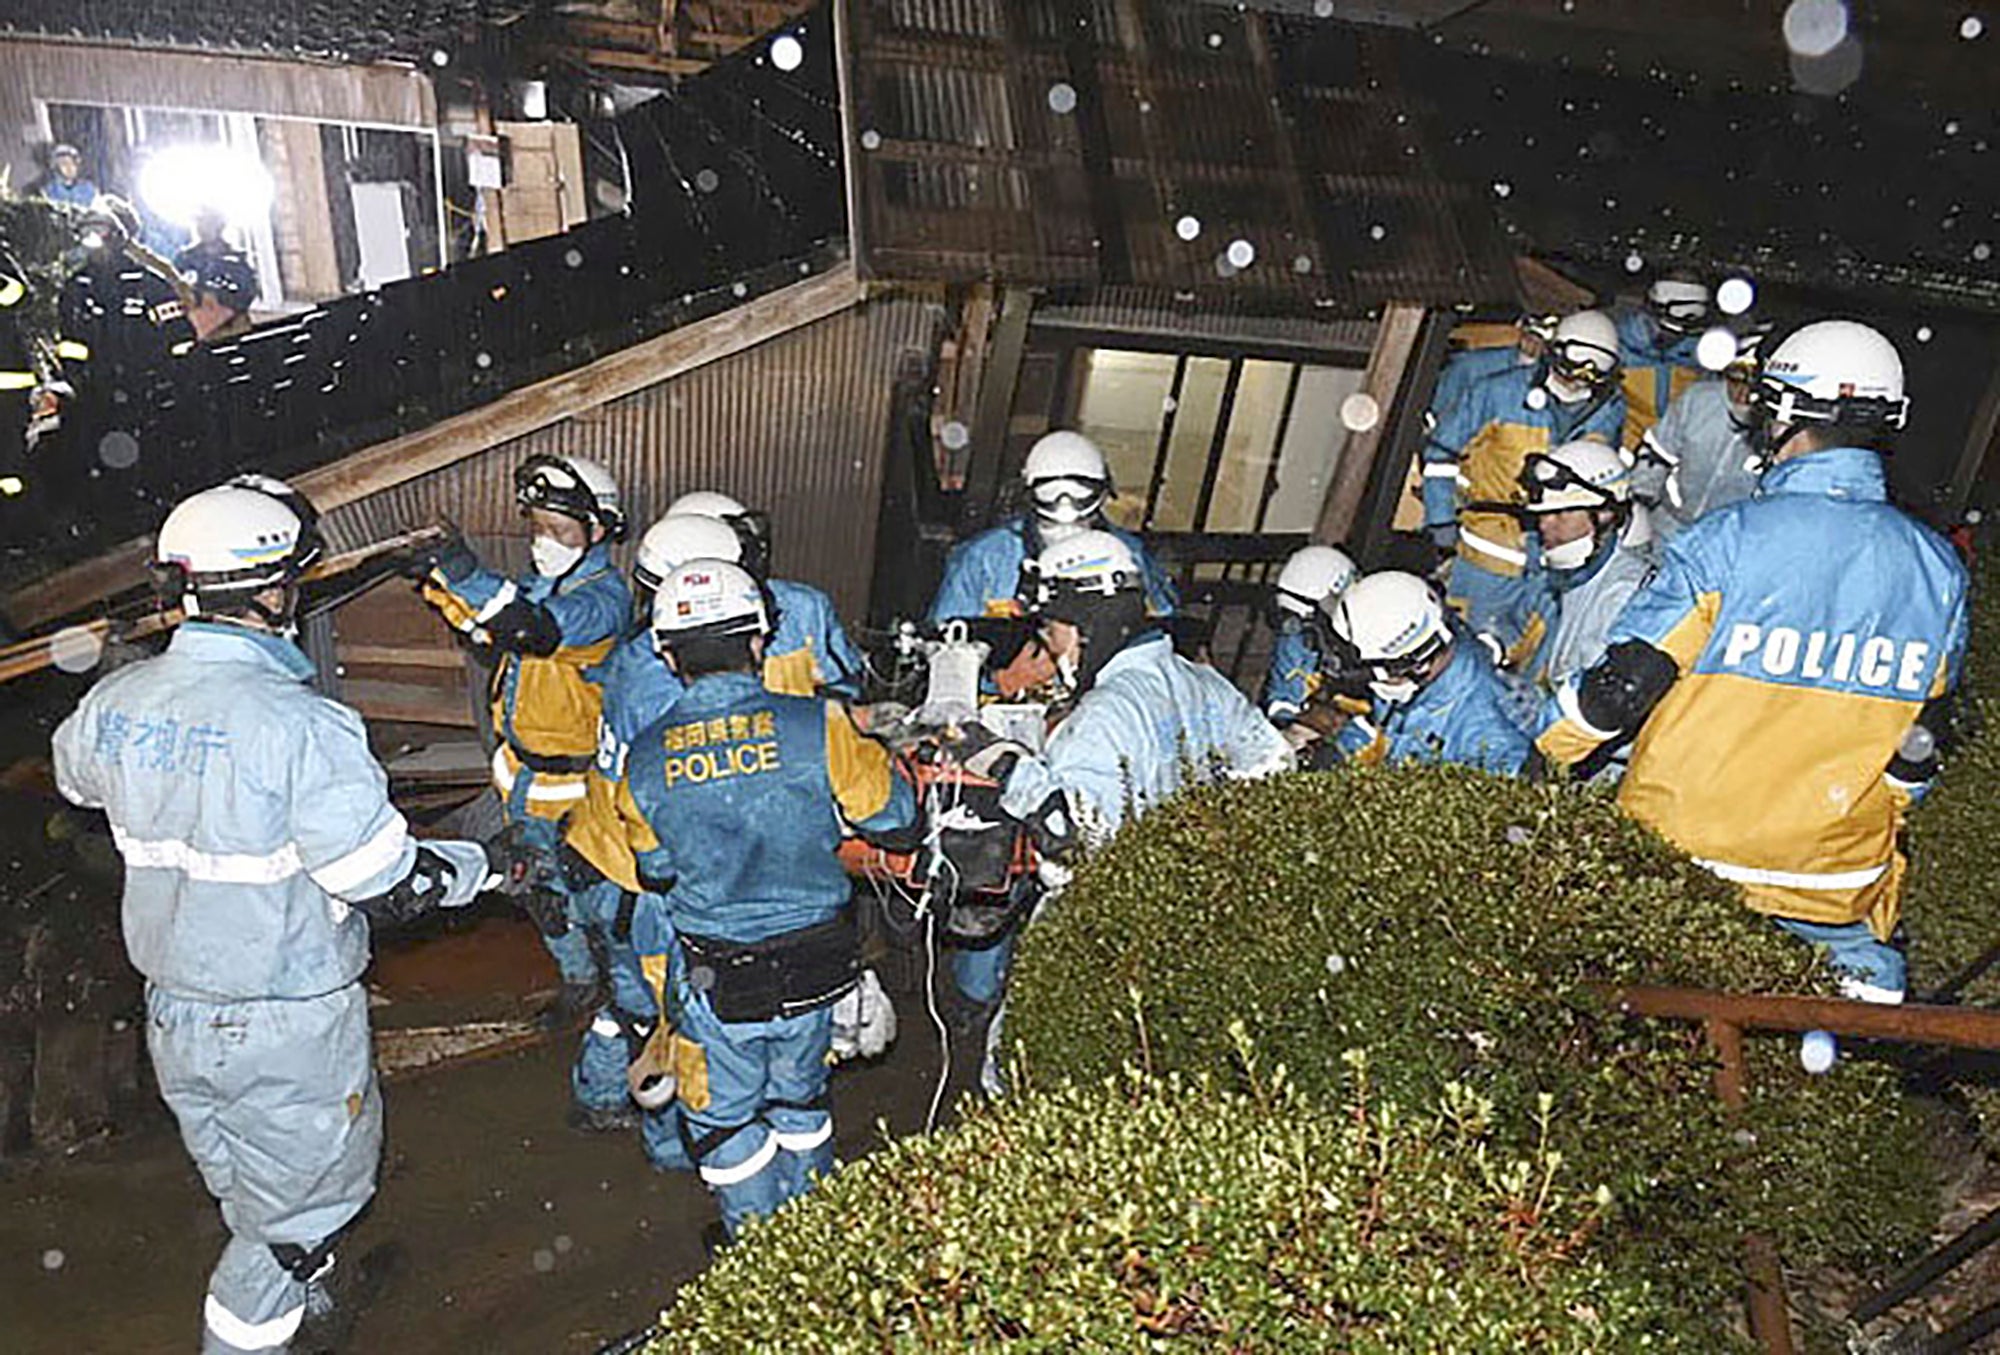 Police officers rescue a woman in her 90s from a collapsed house in Suzu, Ishikawa prefecture, Japan, on Saturday